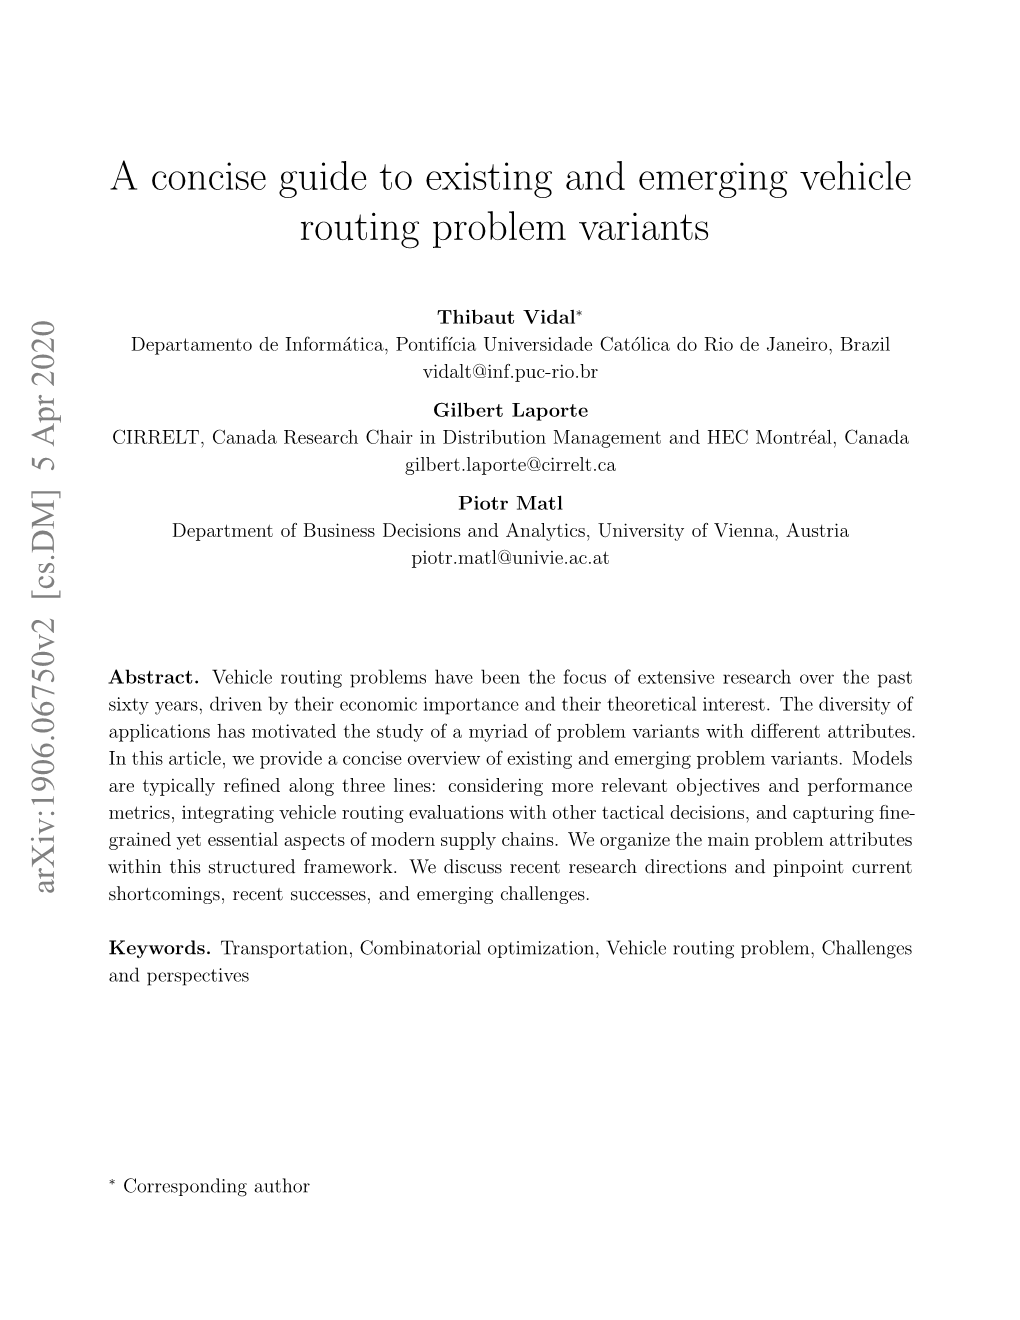 A Concise Guide to Existing and Emerging Vehicle Routing Problem